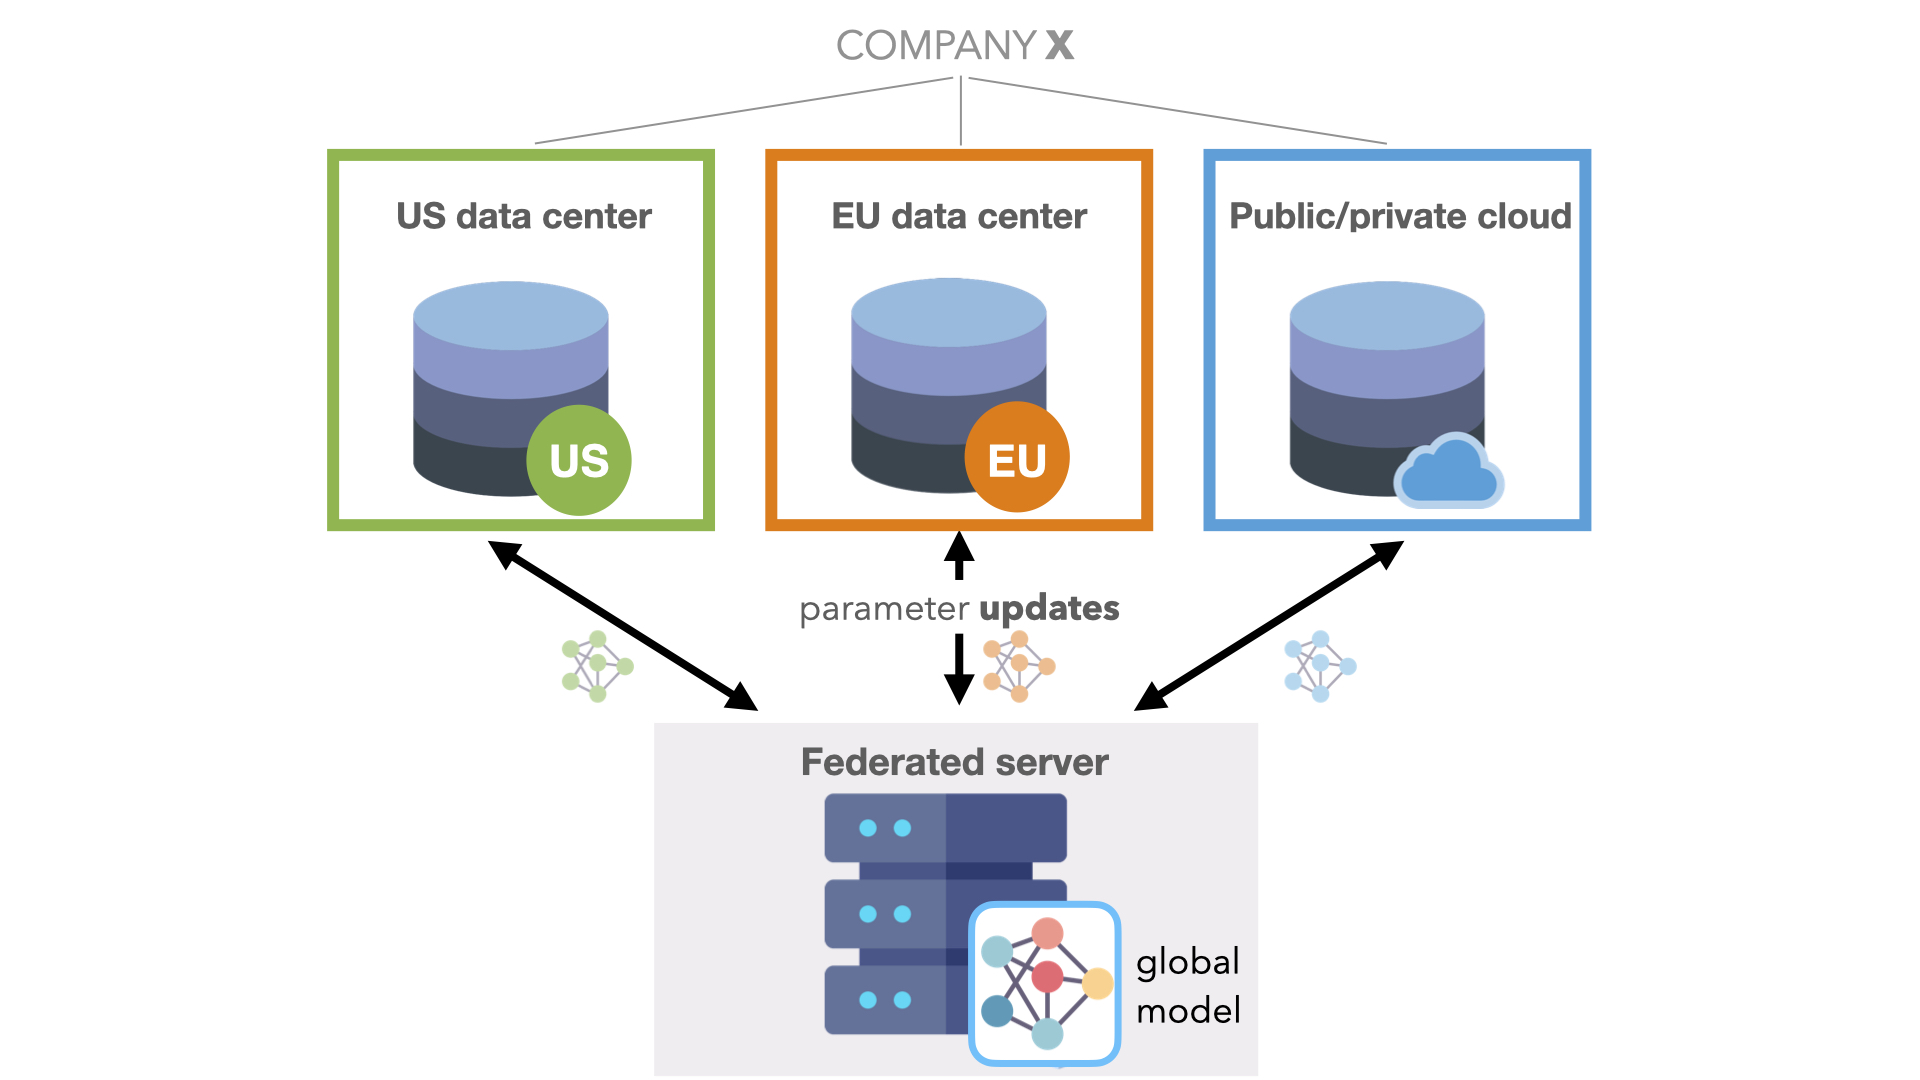 Example workflow in an intra-company use case showing a federated server storing the global model and then receiving parameters or model weights from client nodes (US data center, EU data center, public/private cloud).